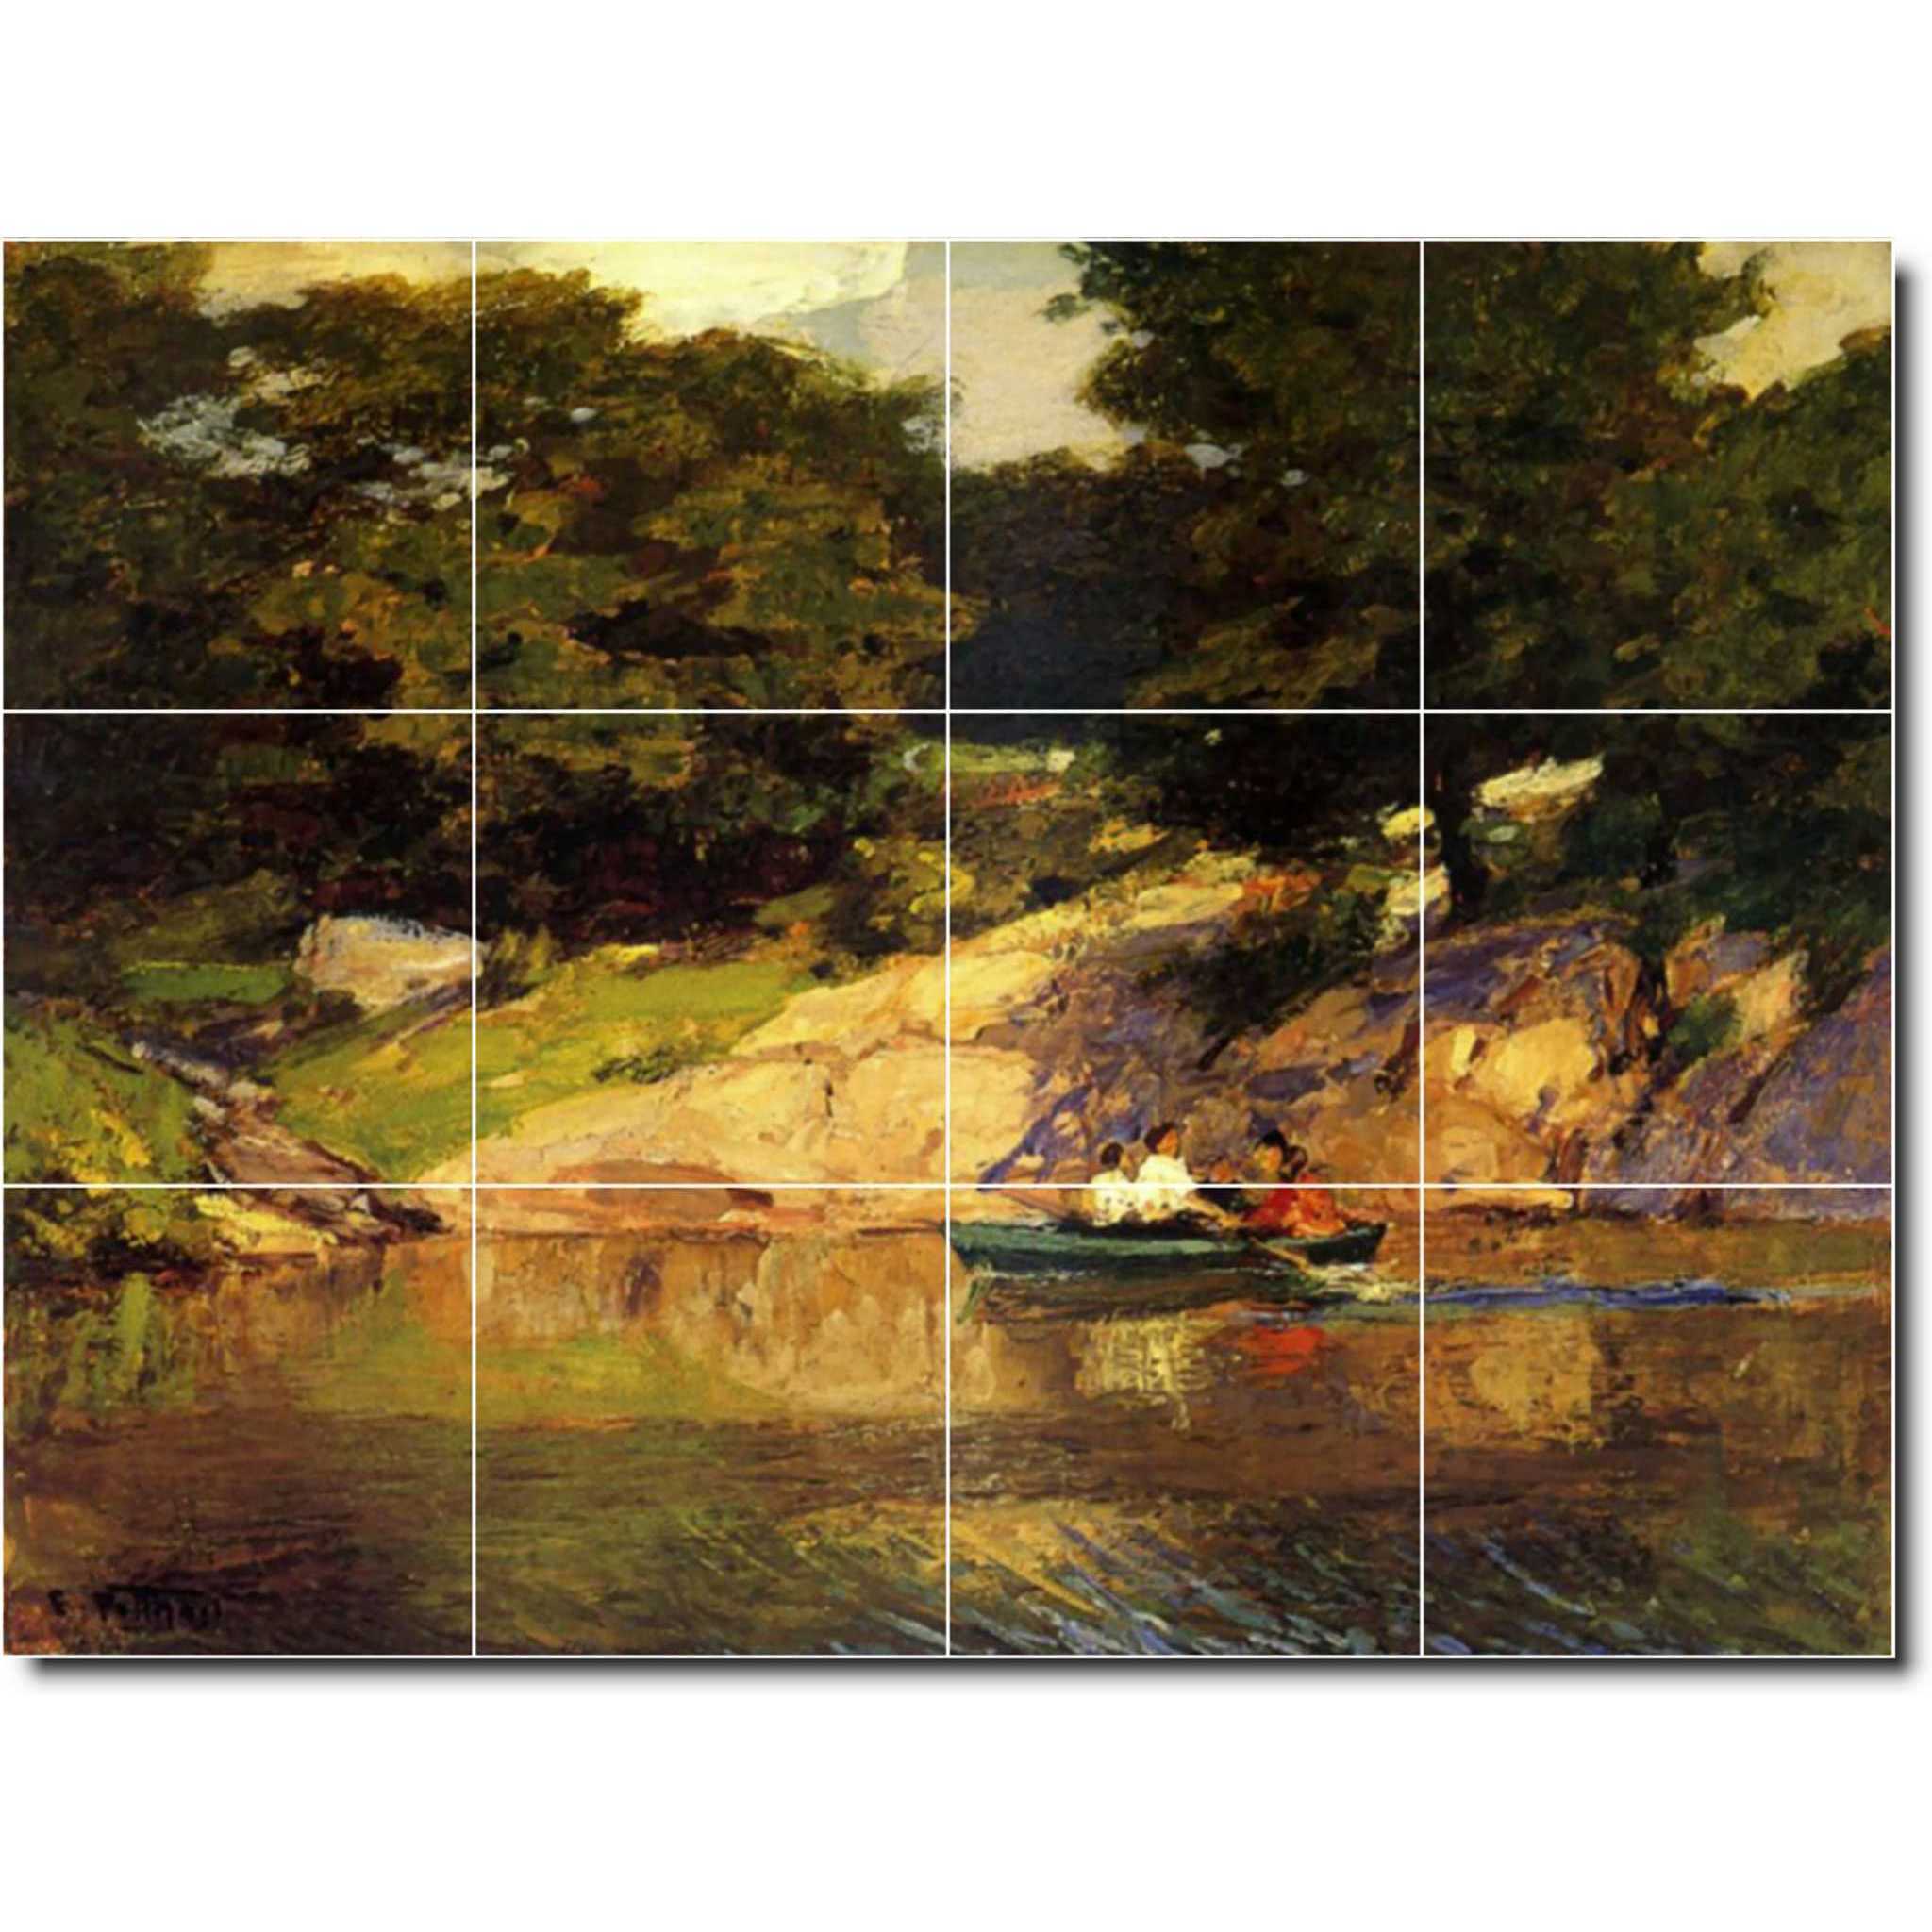 edward potthast country painting ceramic tile mural p06728